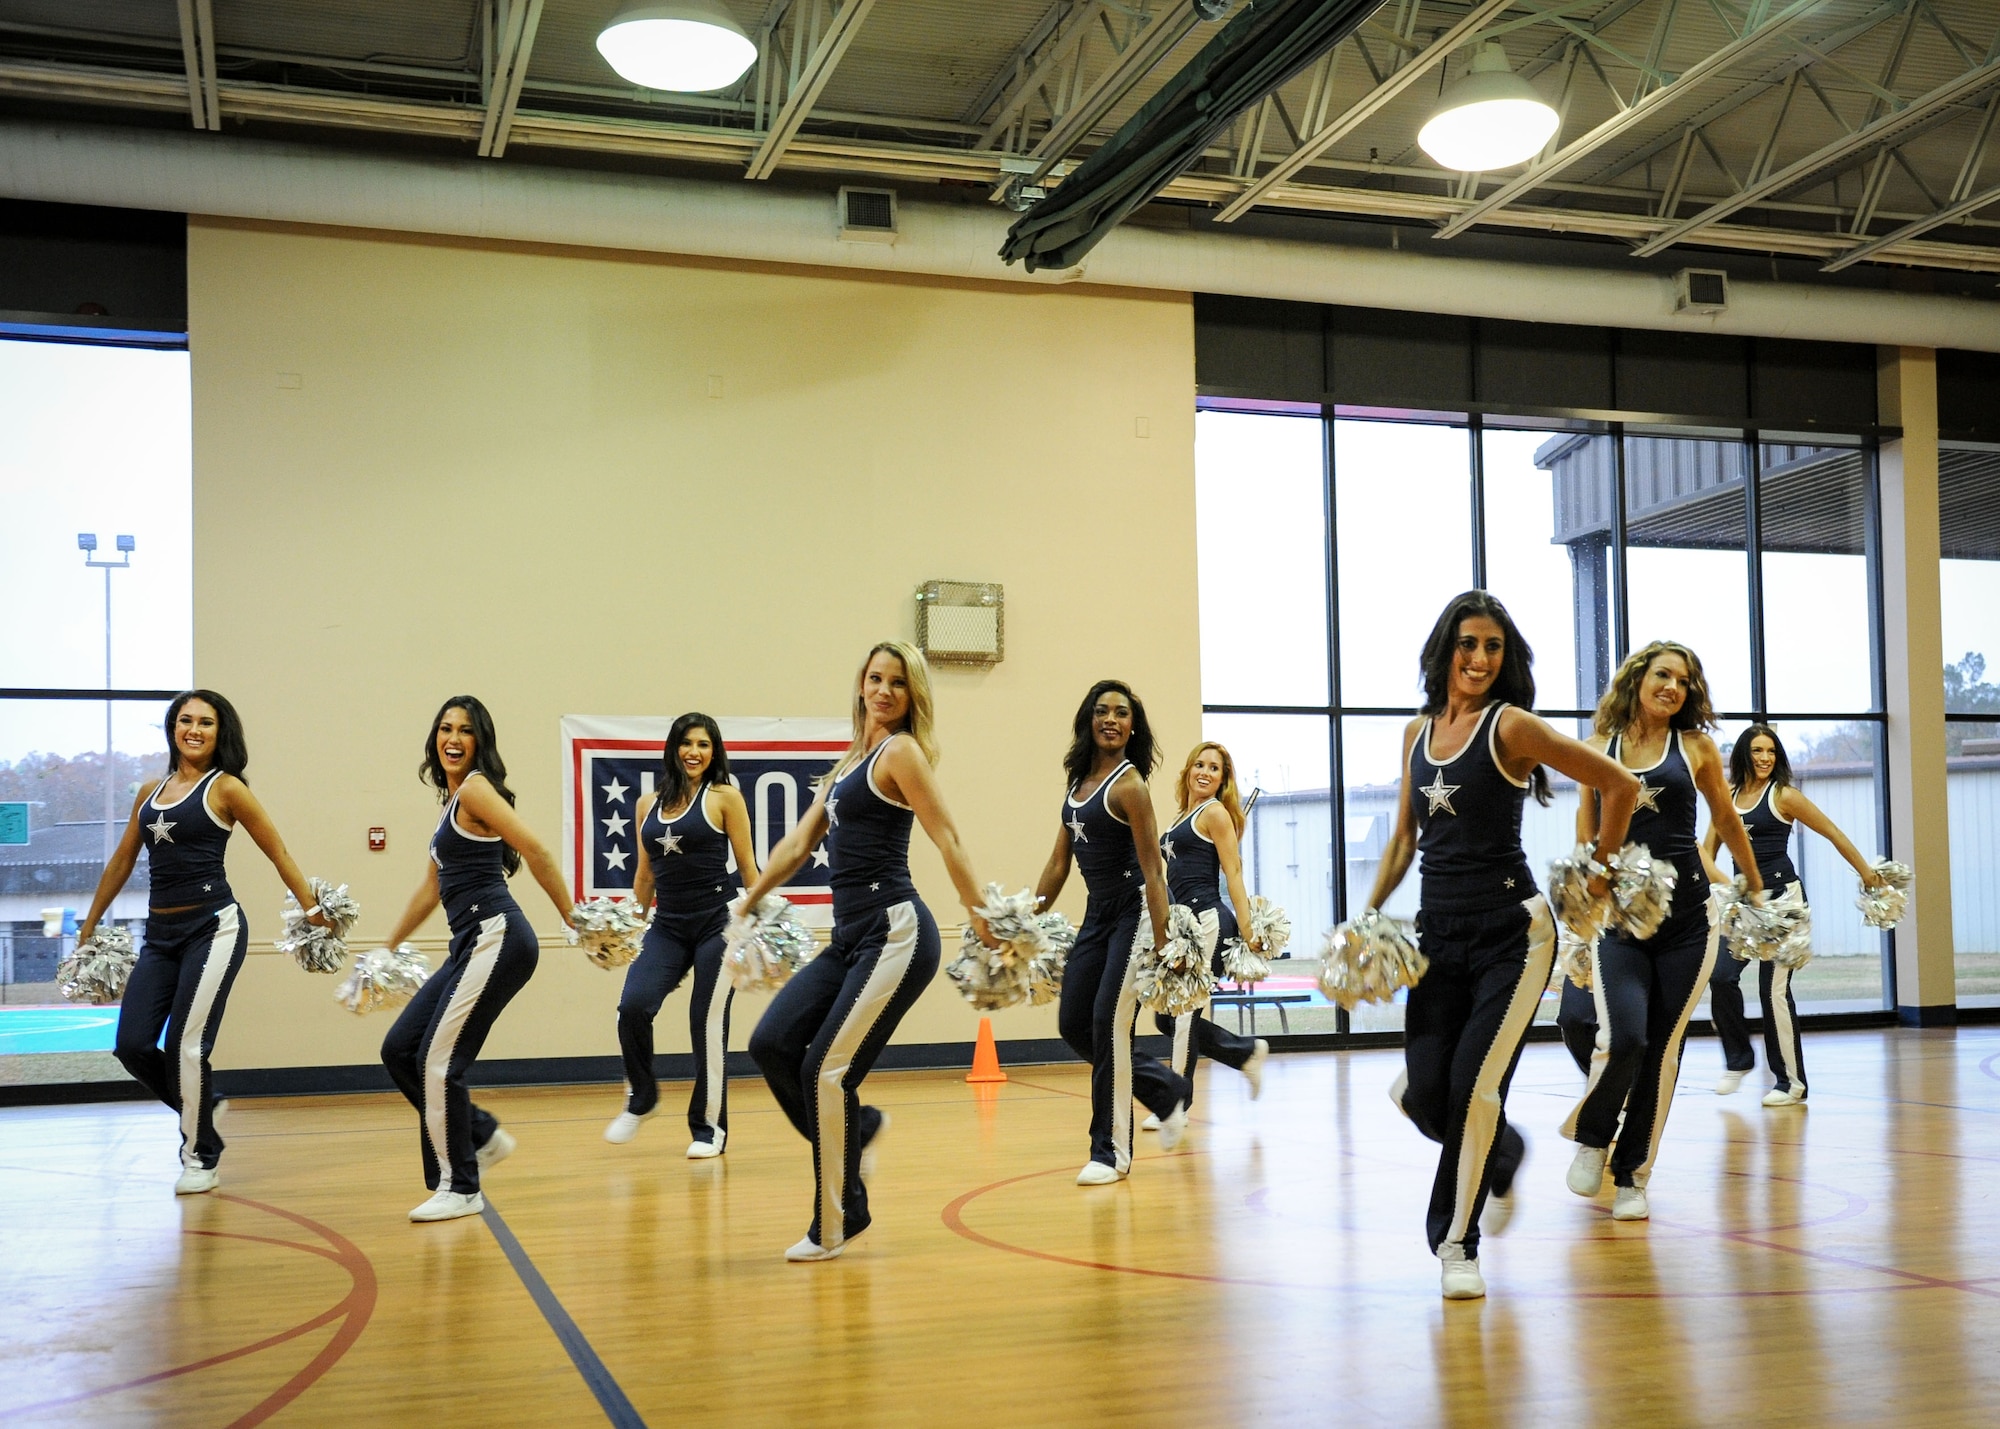 Members of the Dallas Cowboys Cheerleaders perform a routine for people at the Youth Center Dec. 4, 2017, on Columbus Air Force Base, Mississippi. Following their routine, the cheerleaders performed a Cheer to Fitness Clinic for children who attended. (U.S. Air Force photo by Staff Sgt. Christopher Gross)